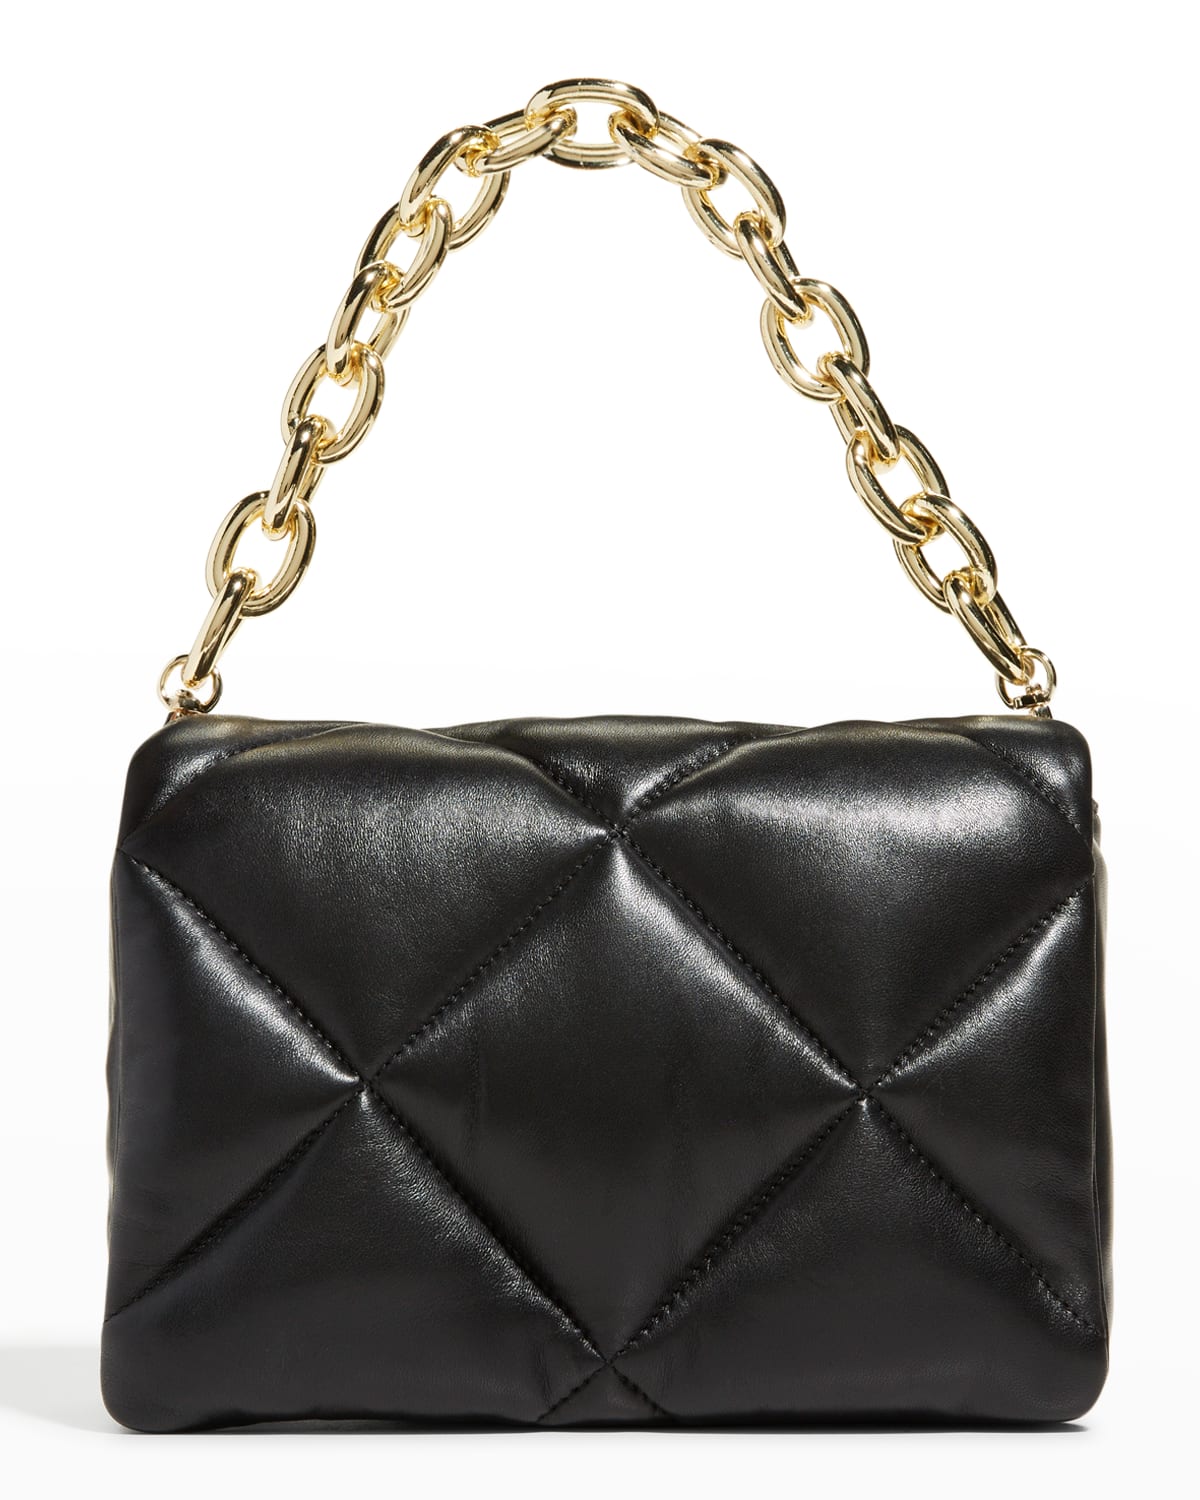 STAND STUDIO BRYNN QUILTED LEATHER CHAIN SHOULDER BAG